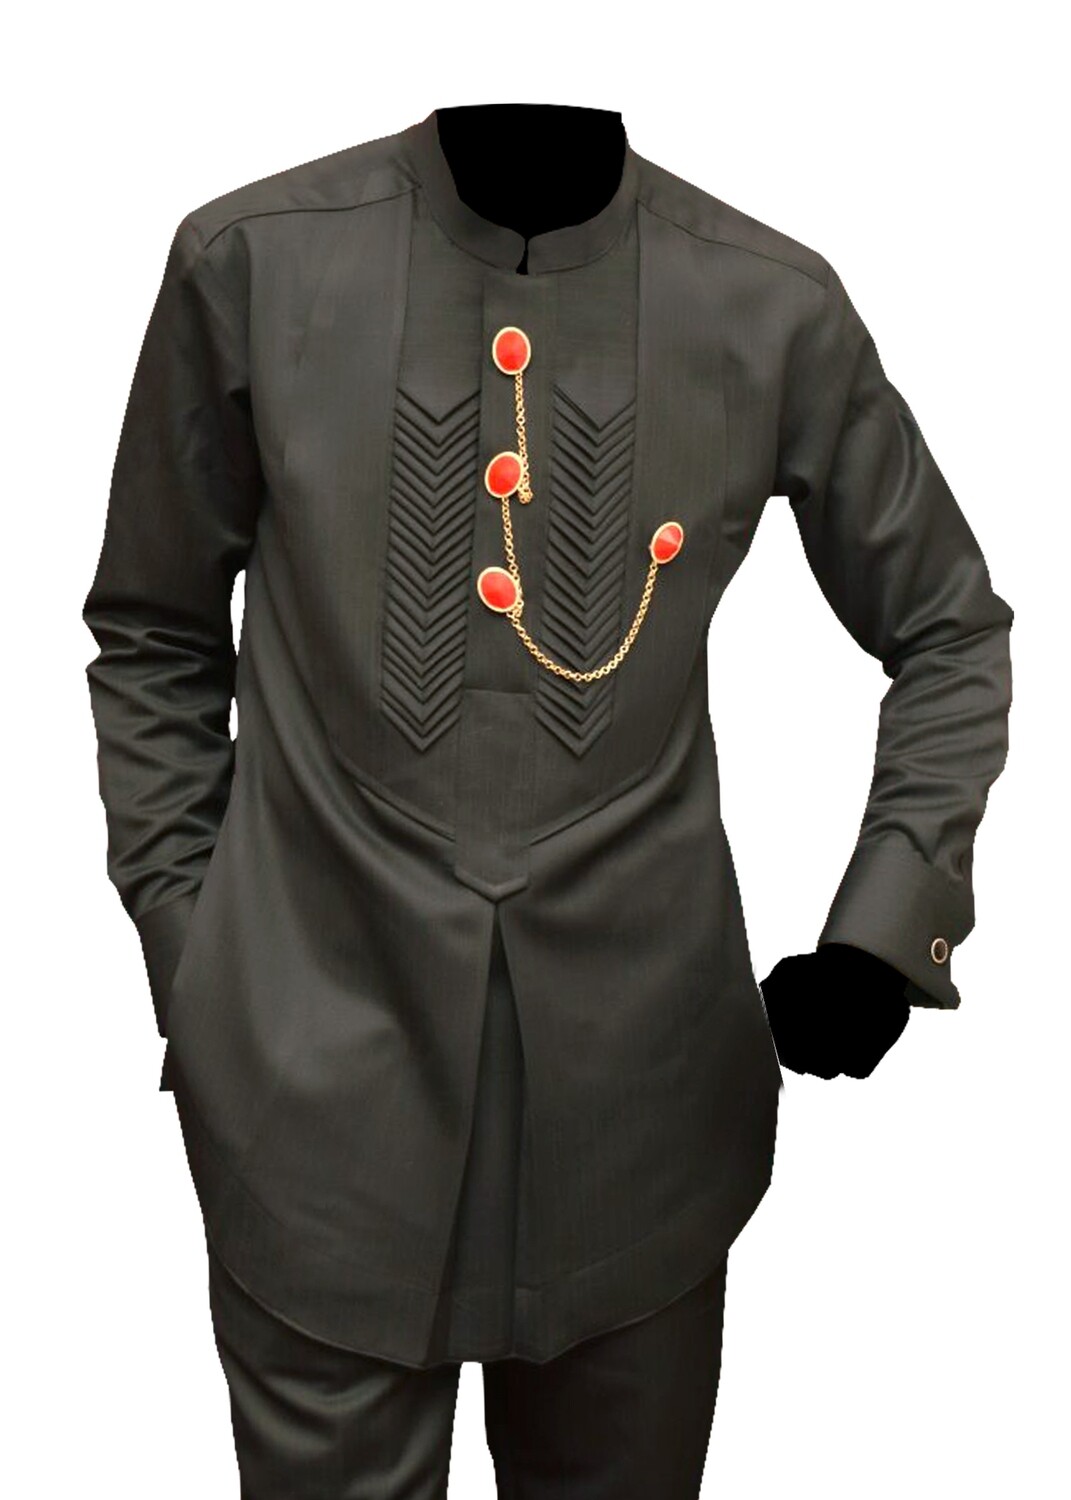 Niger Delta Outfit